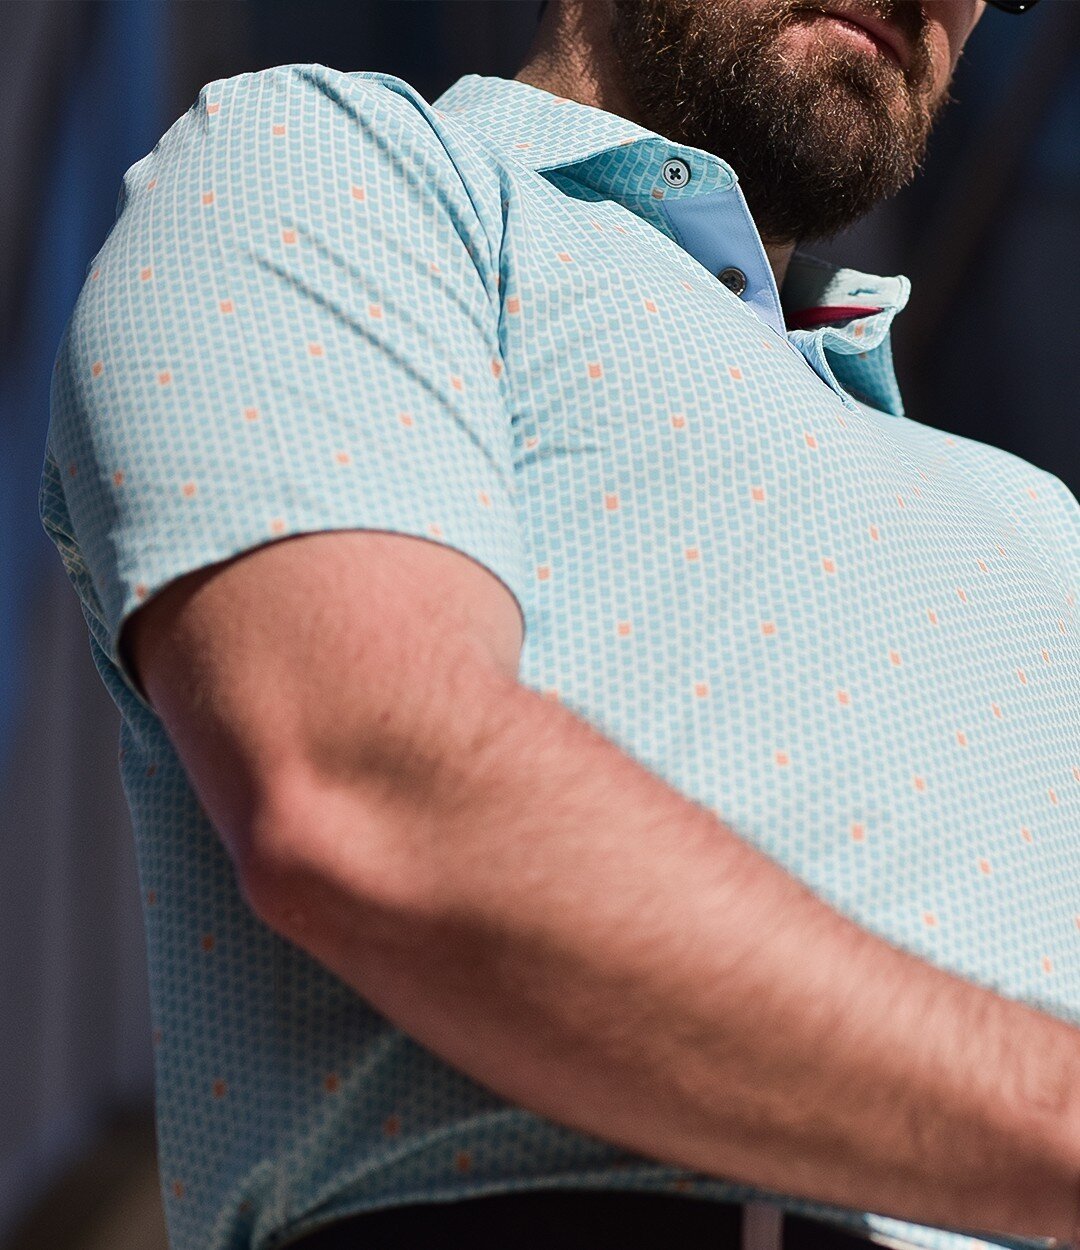 Get ready to revolutionize your polo game with our newest addition from the Santa Rita Collection - The Barrel Polo! With a unique design that's both stylish and comfortable, this shirt is sure to make you stand out from the crowd. ⁠
⁠
-⁠
⁠
Tap to sh